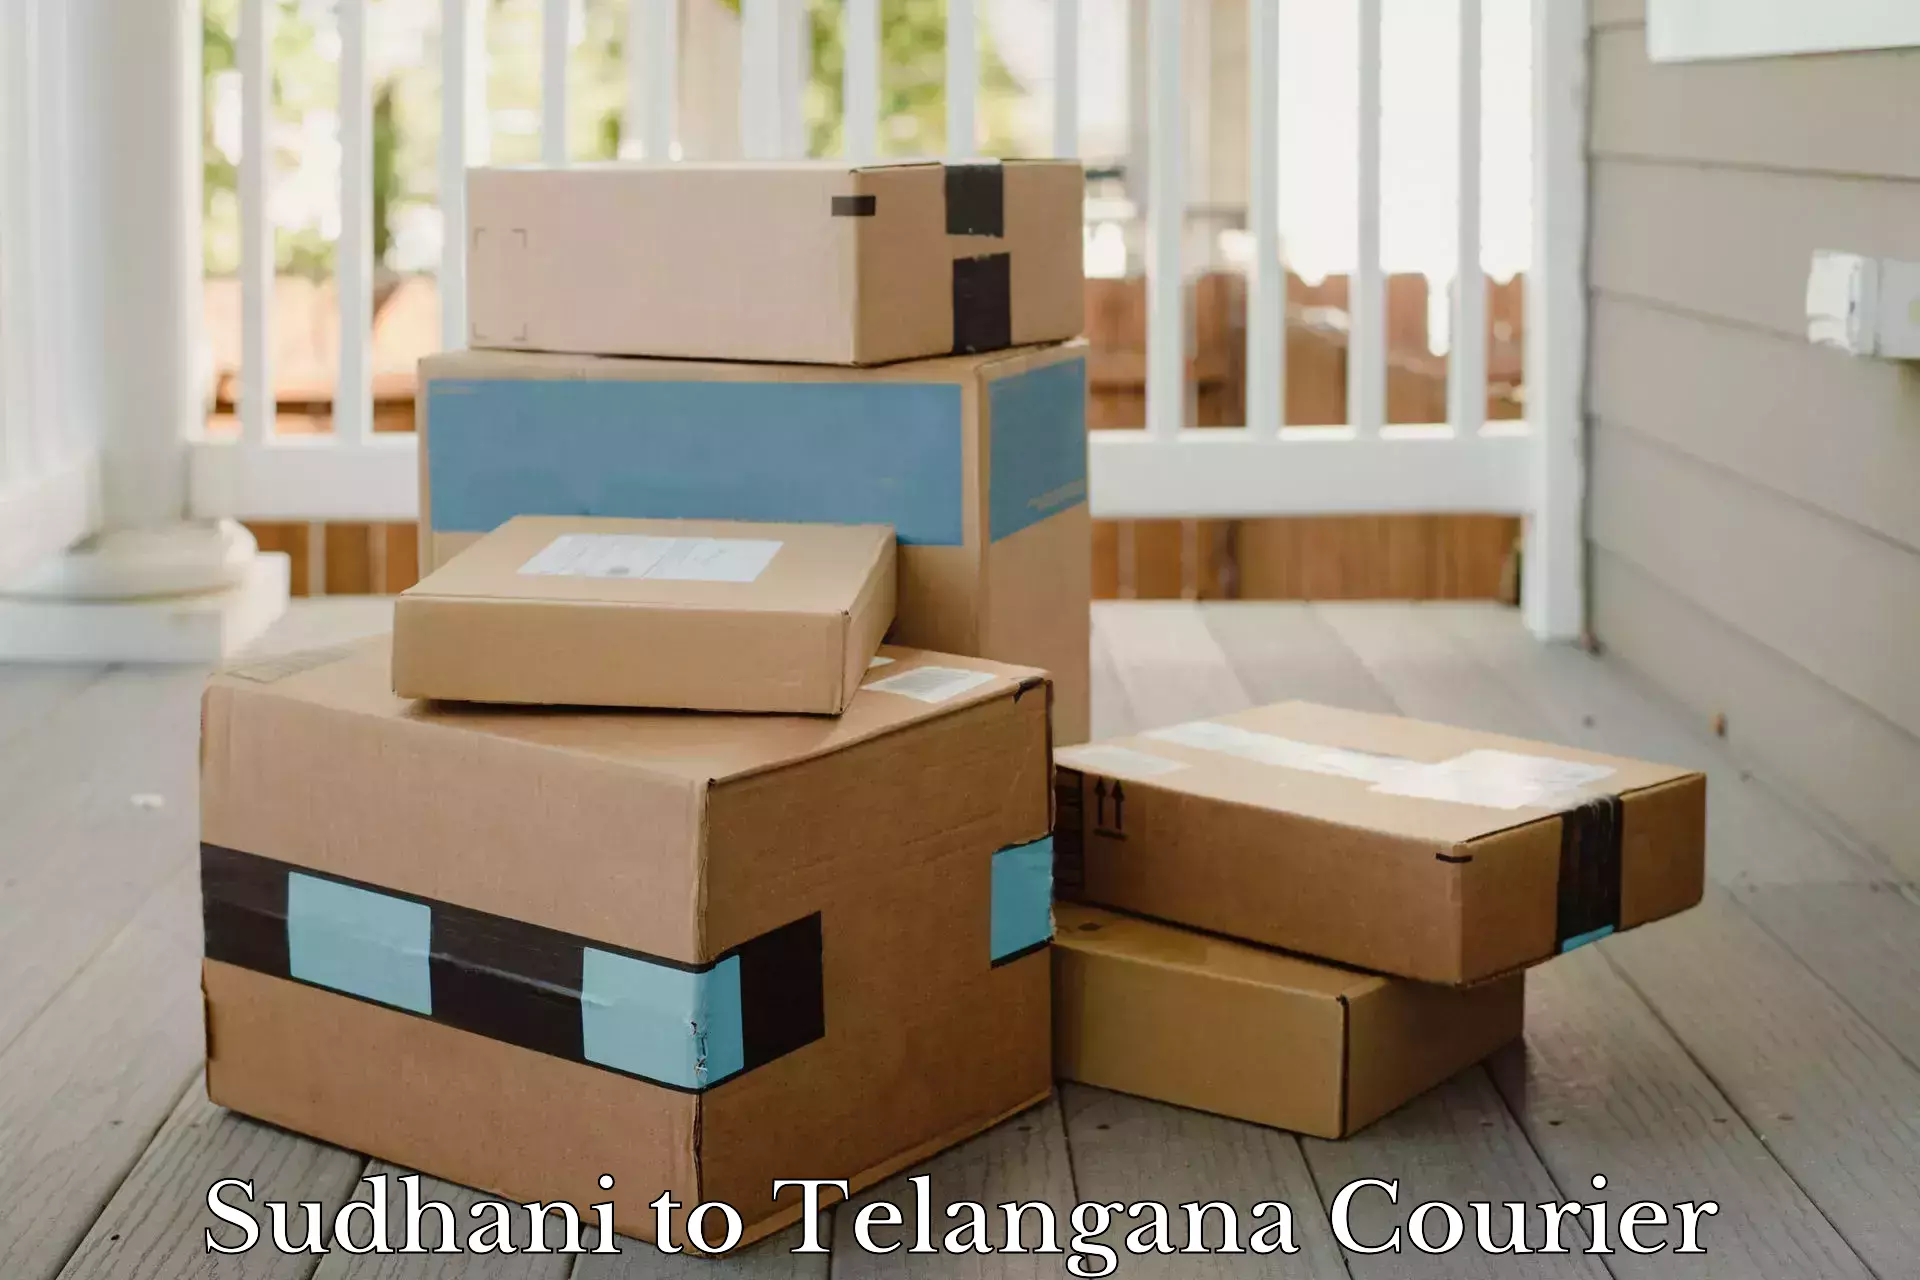 Subscription-based courier Sudhani to Sangareddy